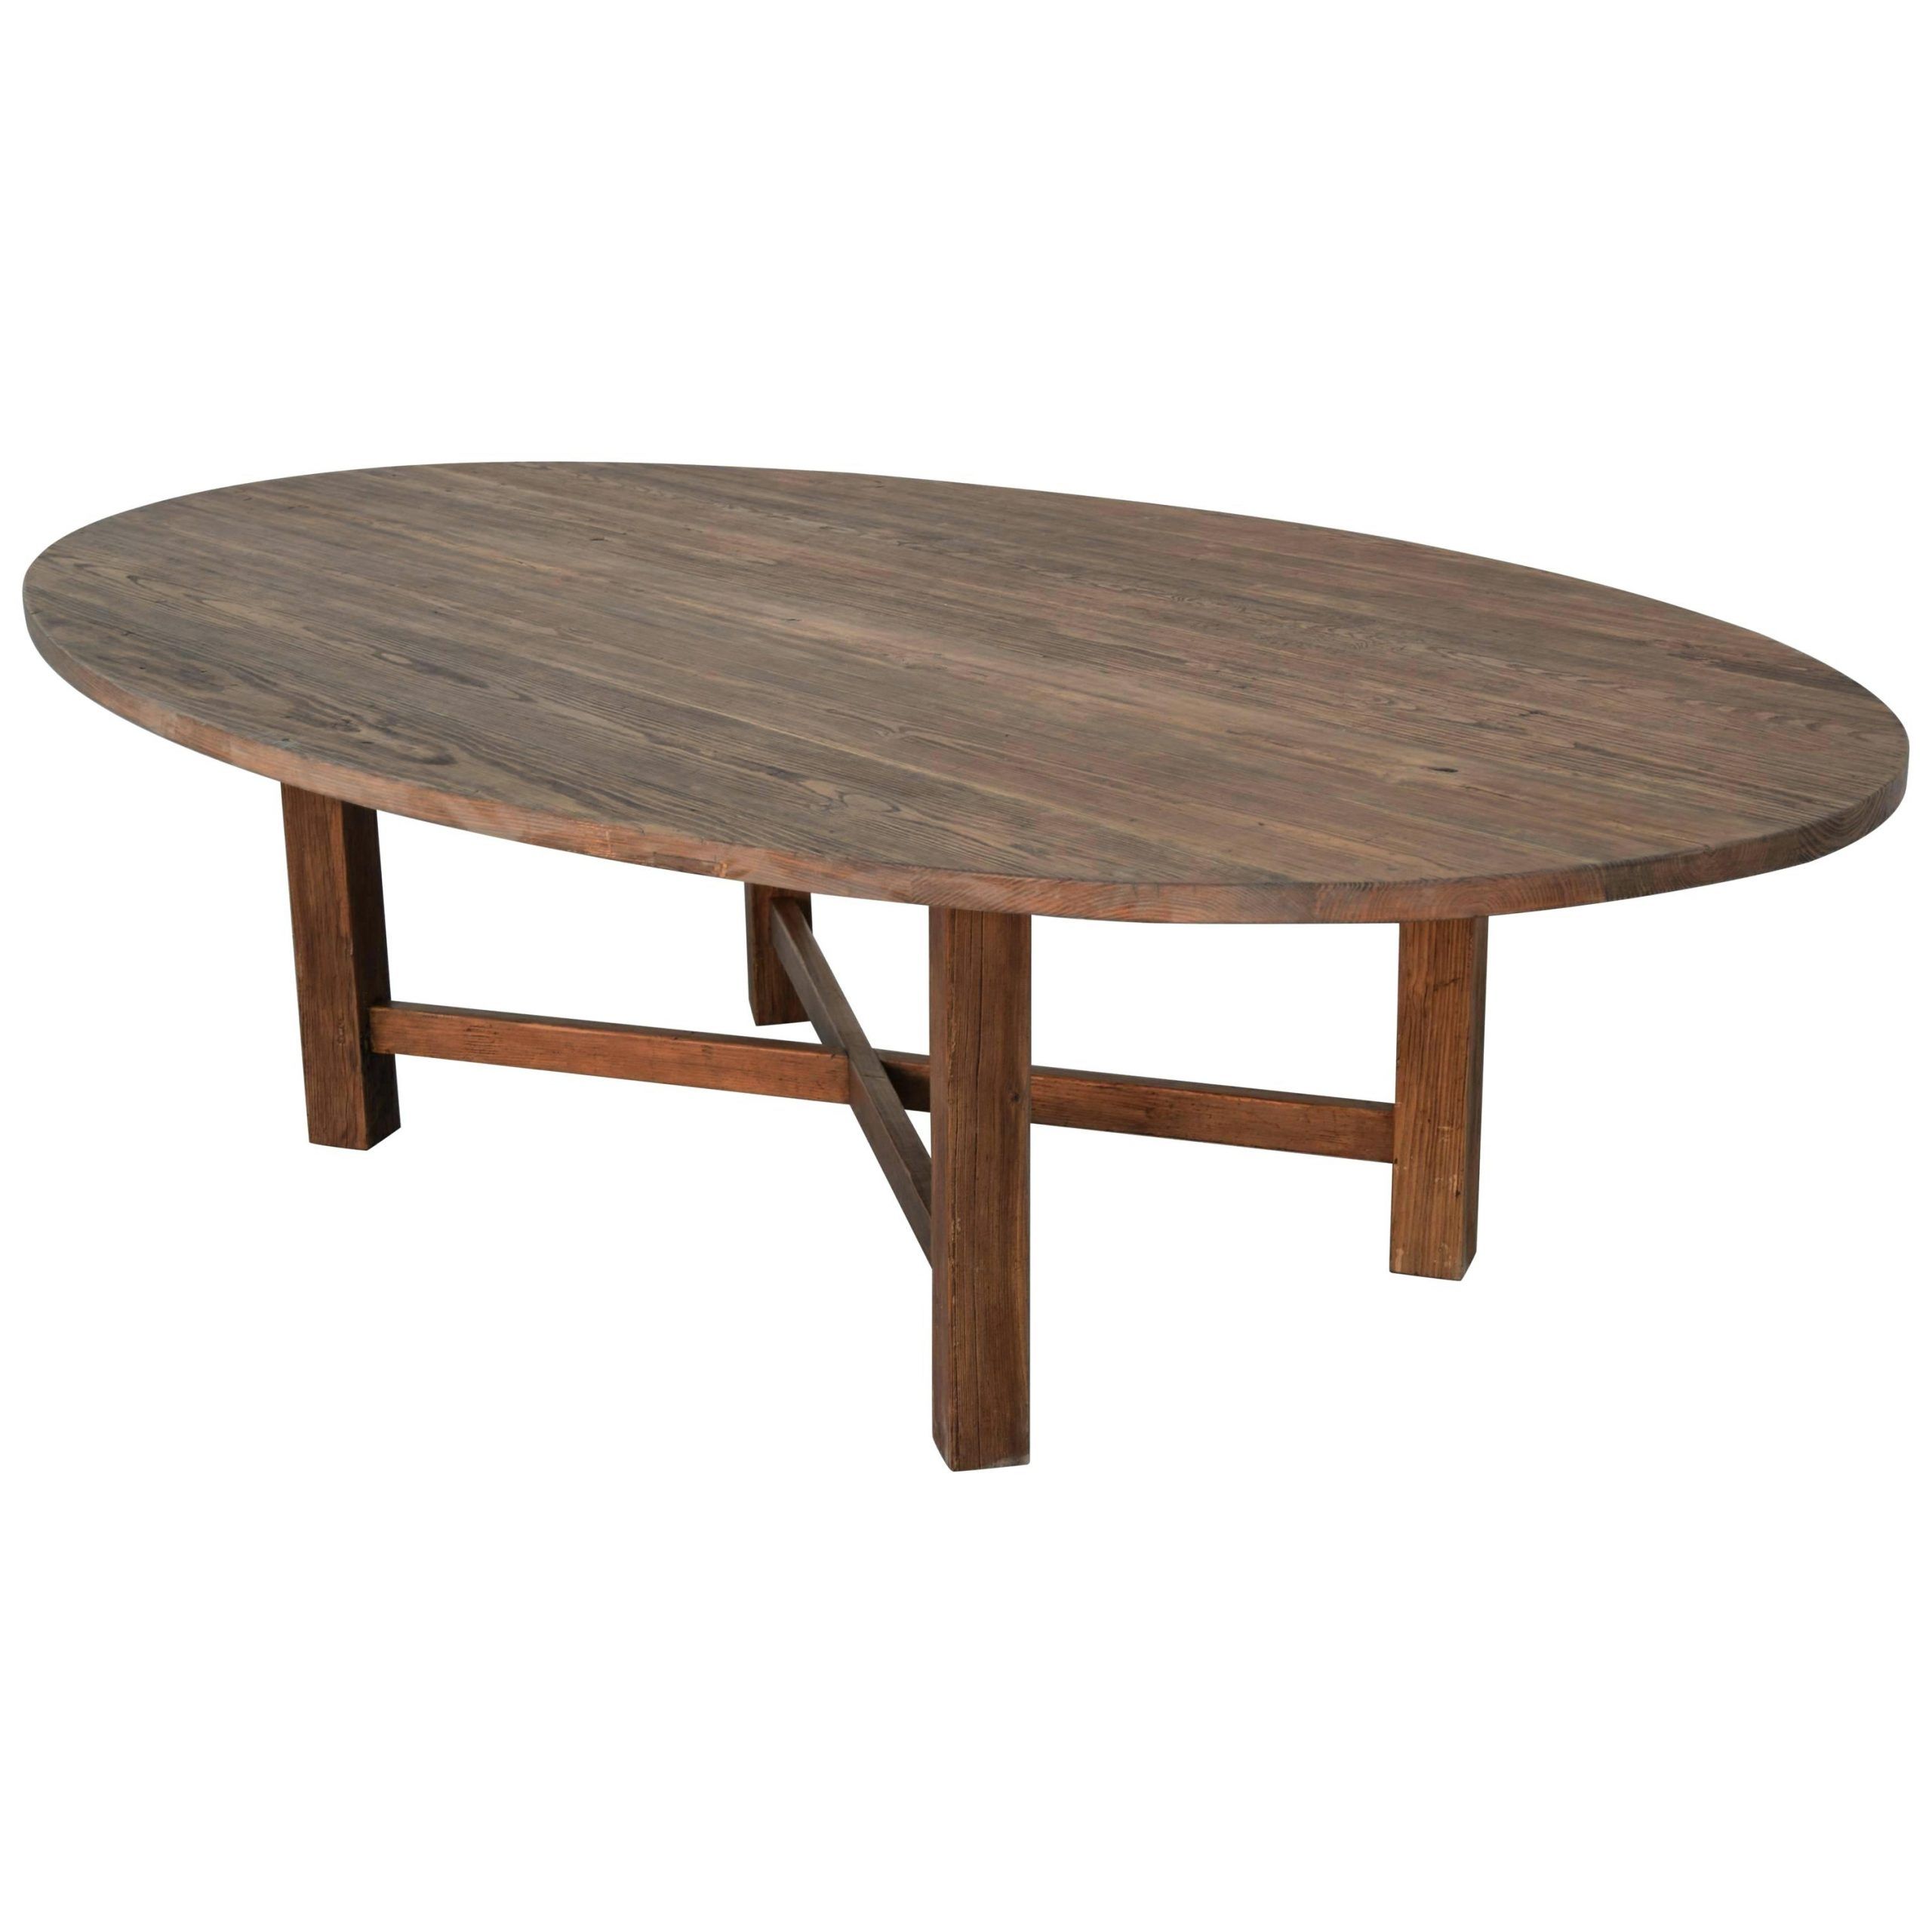 2019 Hart Reclaimed Wood Extending Dining Tables Intended For Reclaimed Wood Oval Dining Table – Axistechnology (View 22 of 25)